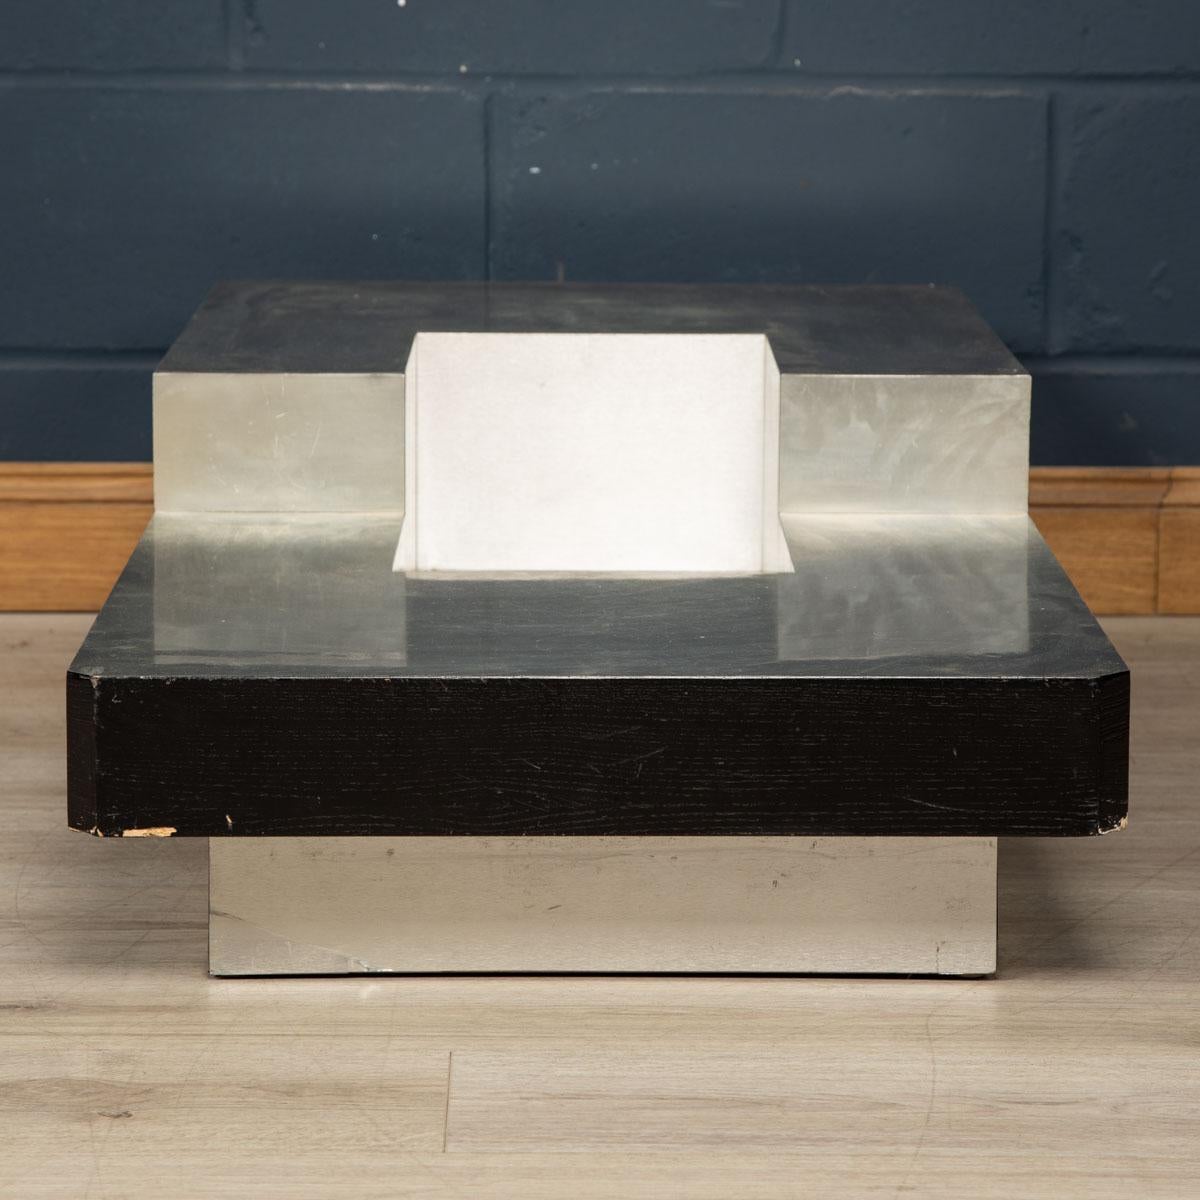 20th Century Coffee Table With A Dry Bar Compartment By Willy Rizzo, Italy In Good Condition In Royal Tunbridge Wells, Kent